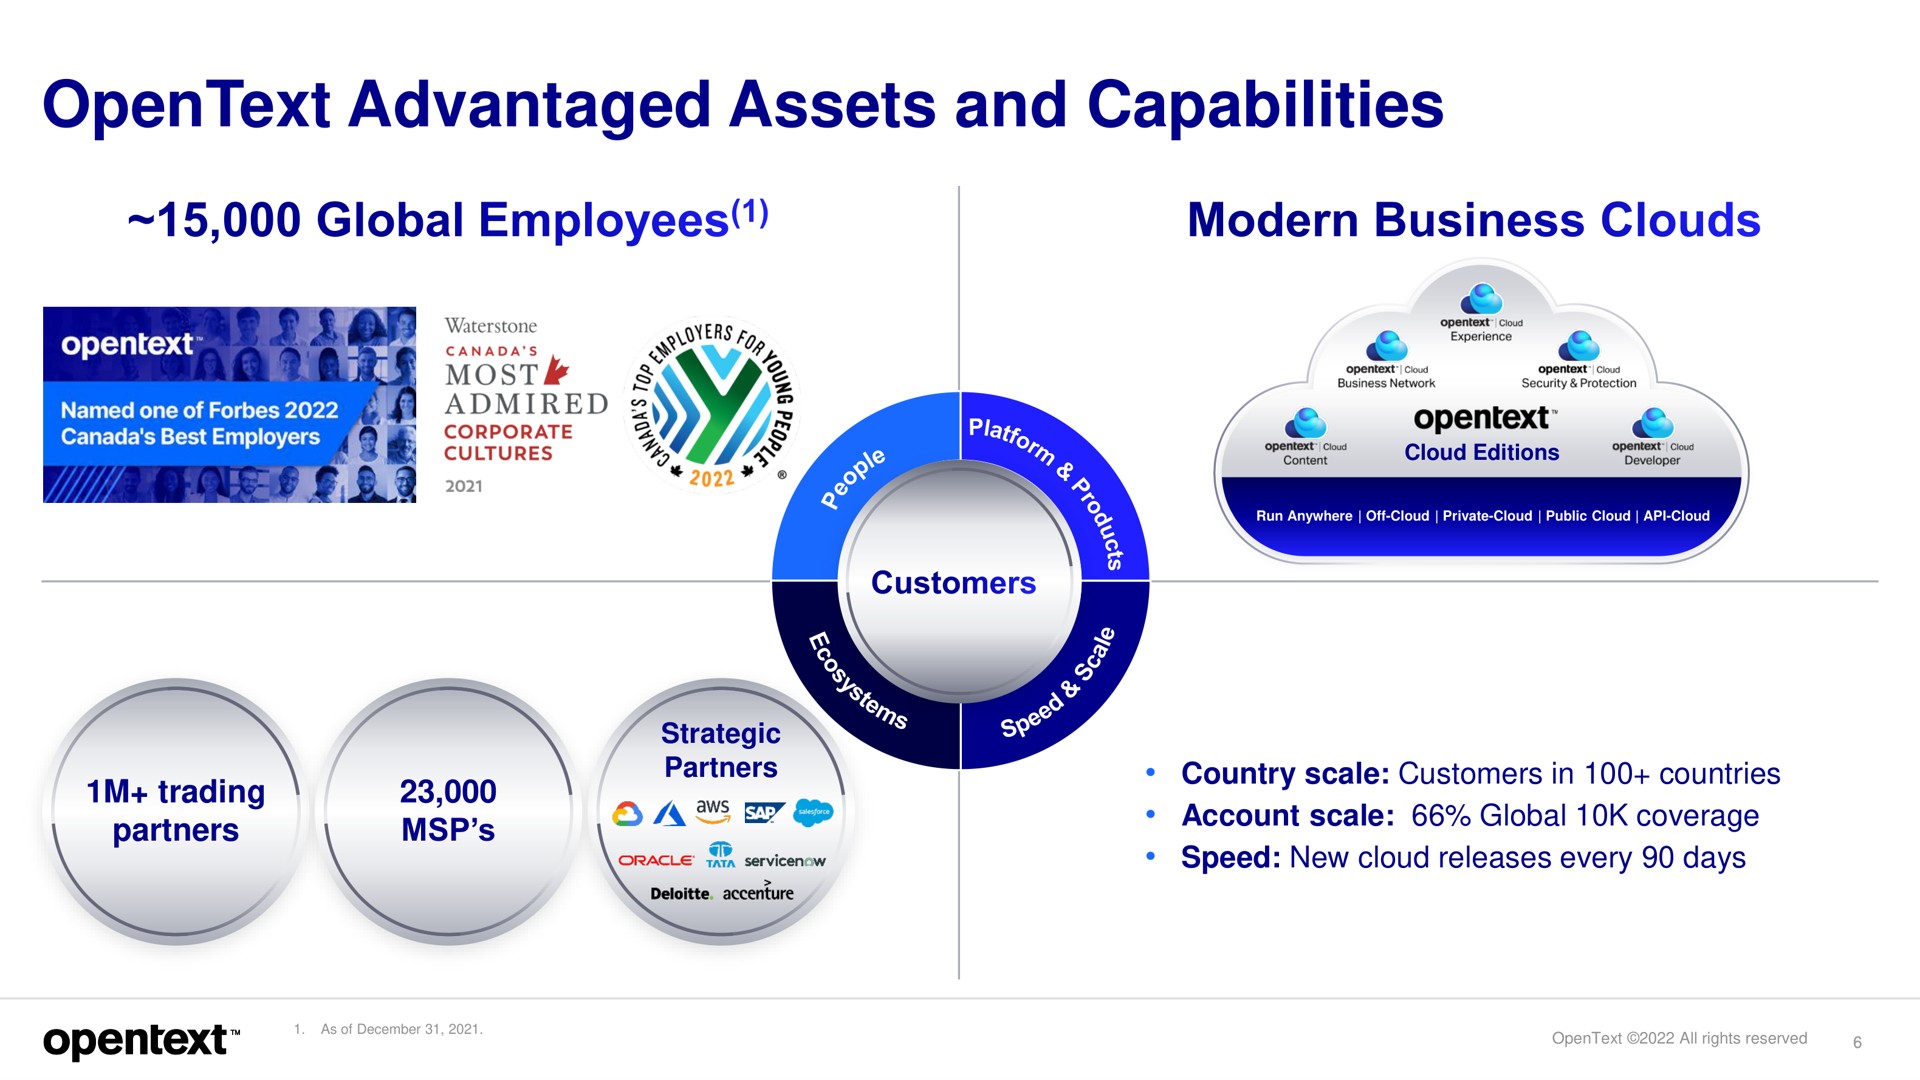 advantaged assets and capabilities | OpenText